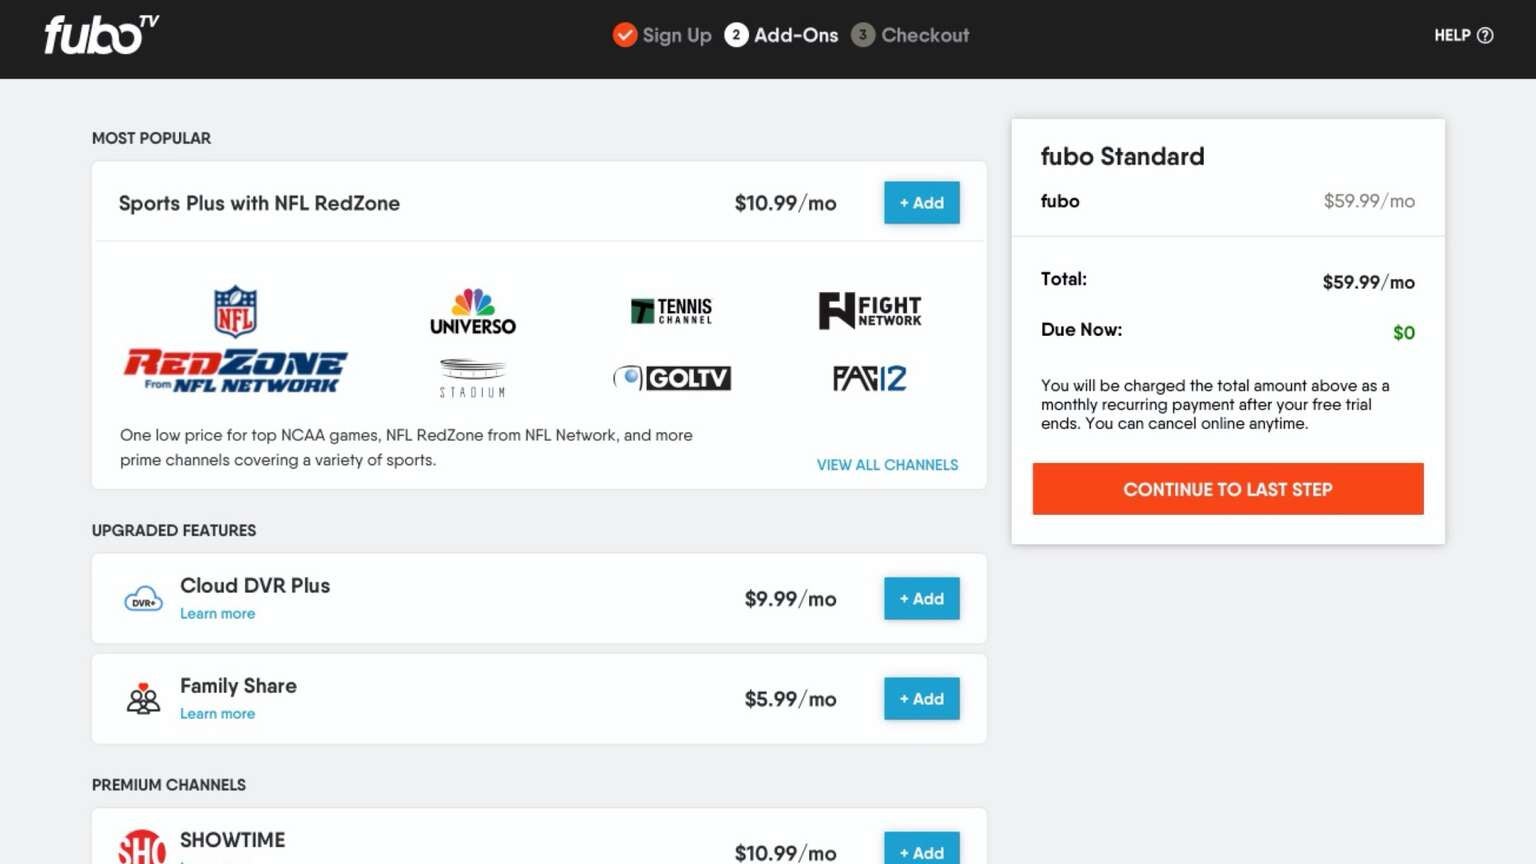 How to SignUp For the fuboTV Standard Plan Get a 7Day Free Trial